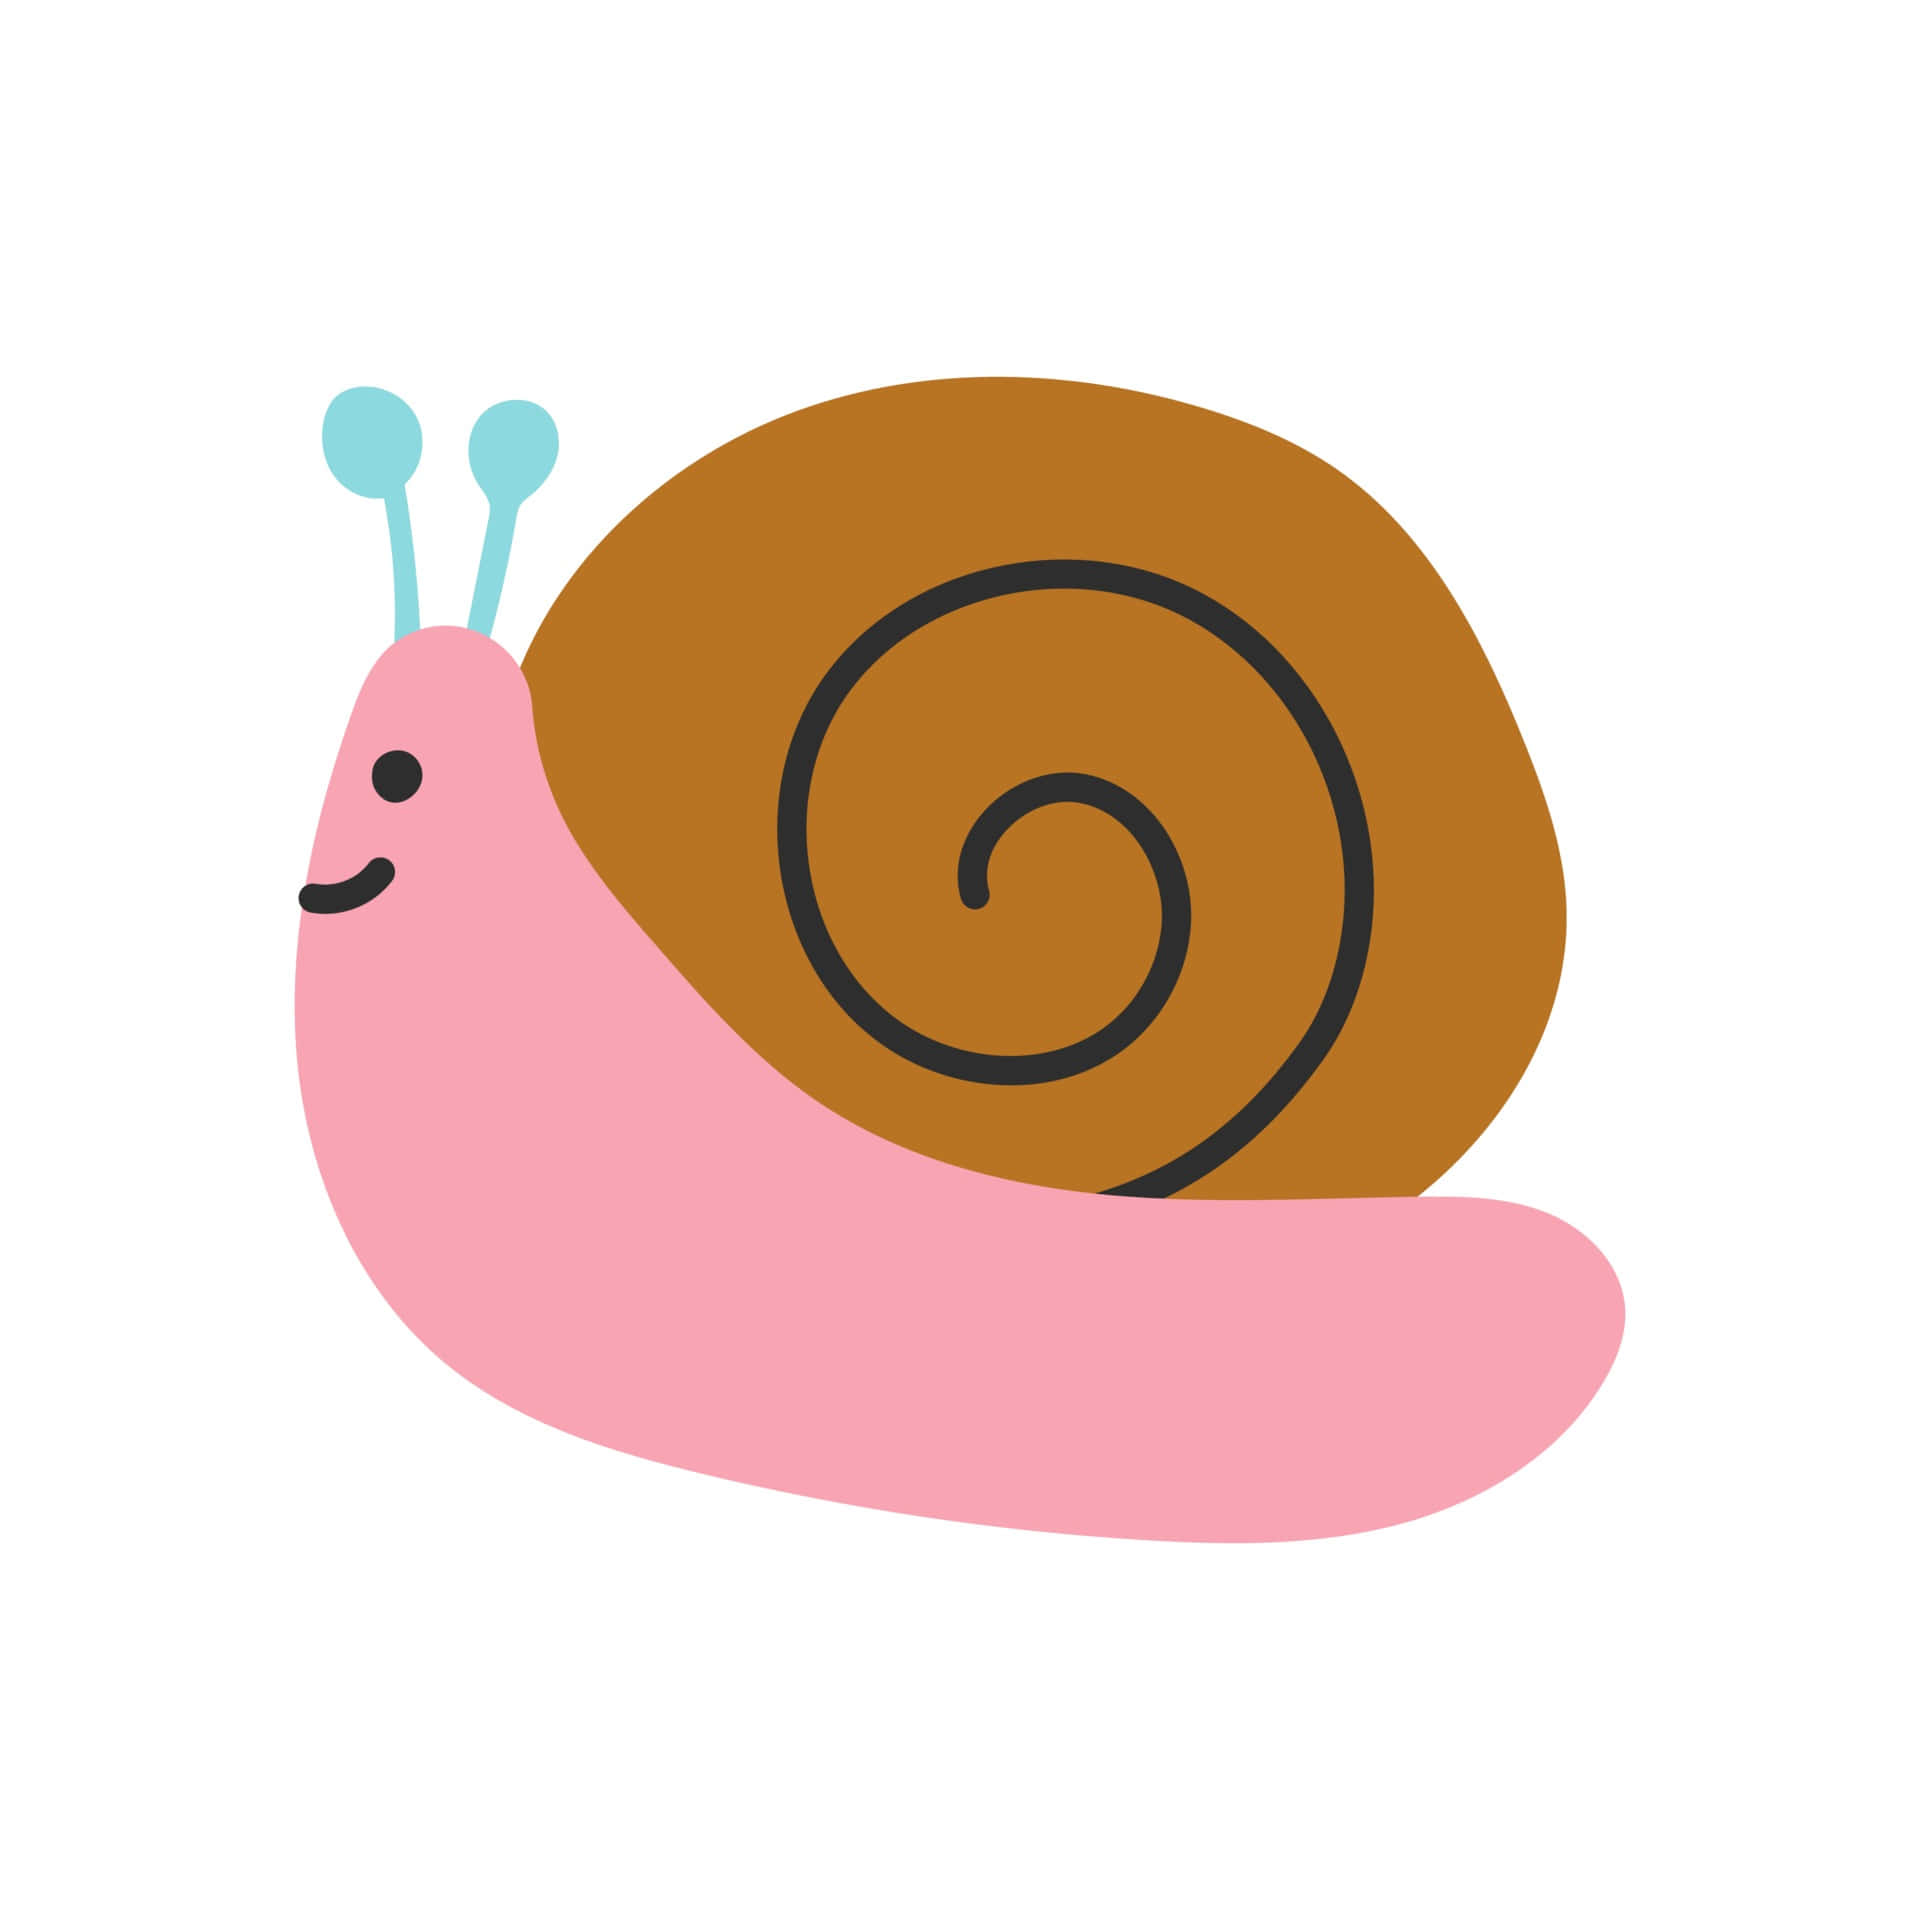 A Snail Carrying Its House on Its Back